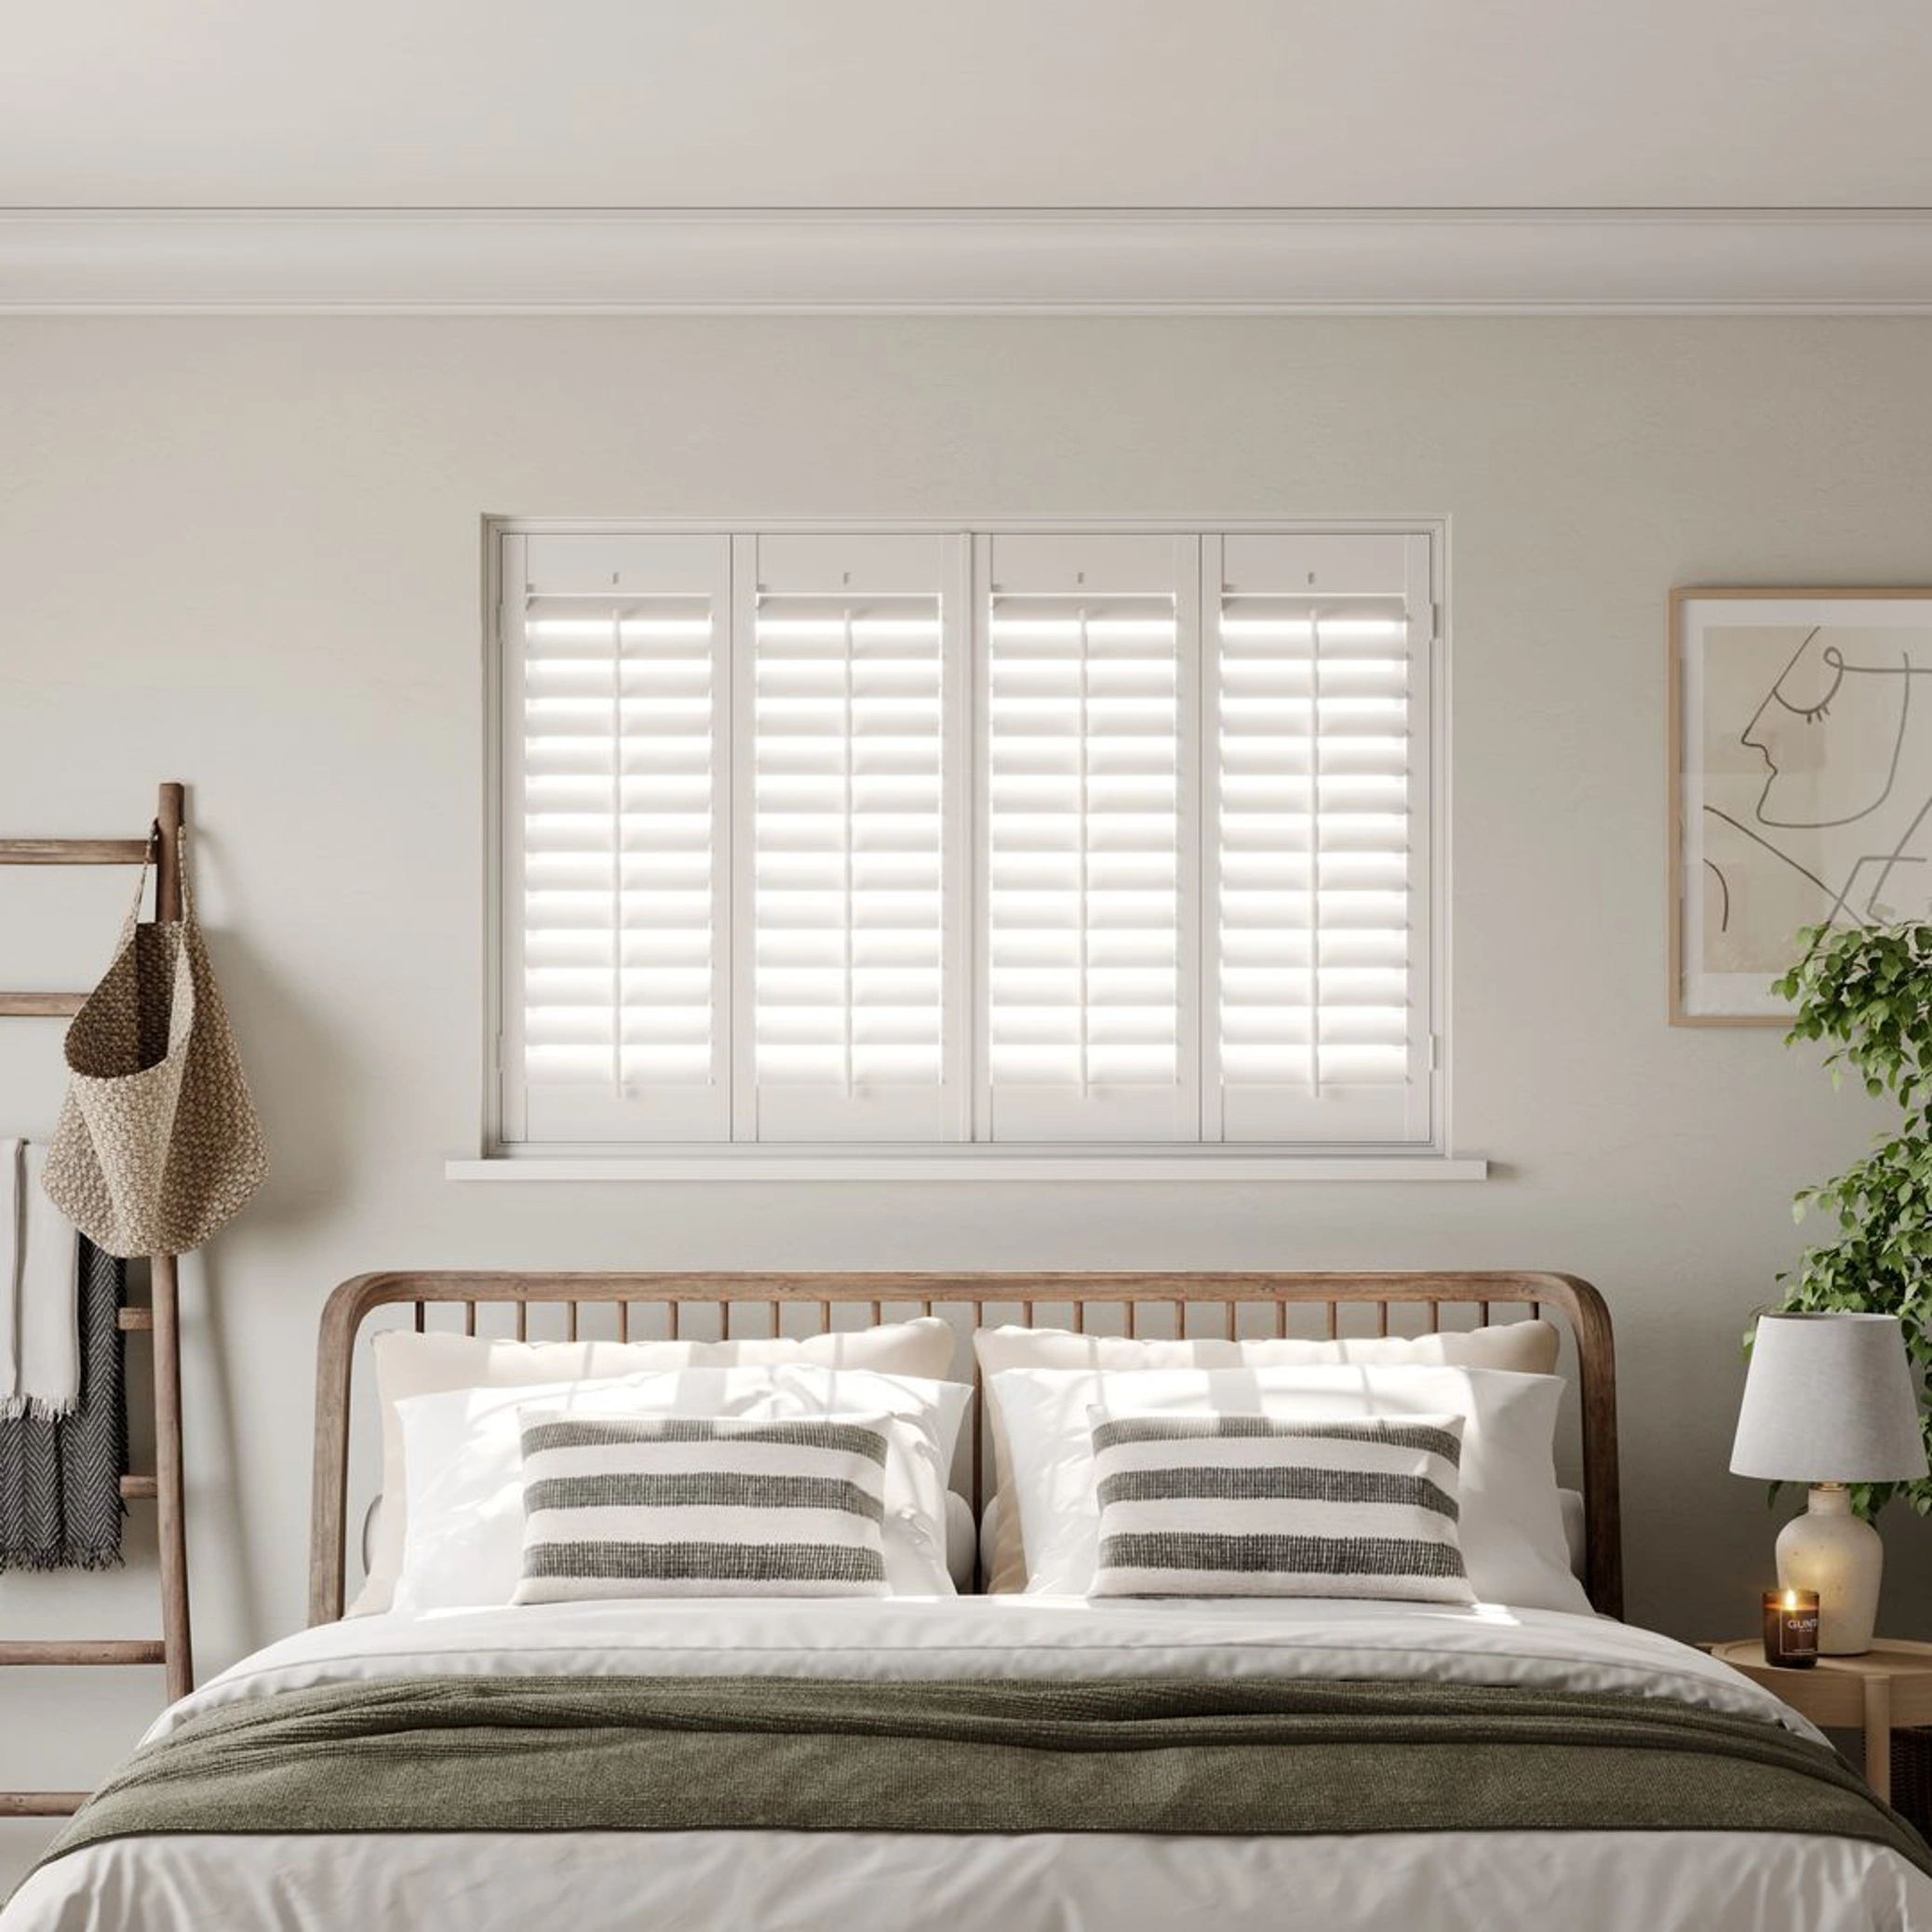 A modern neutral bedroom with Traffic White full height wooden shutters